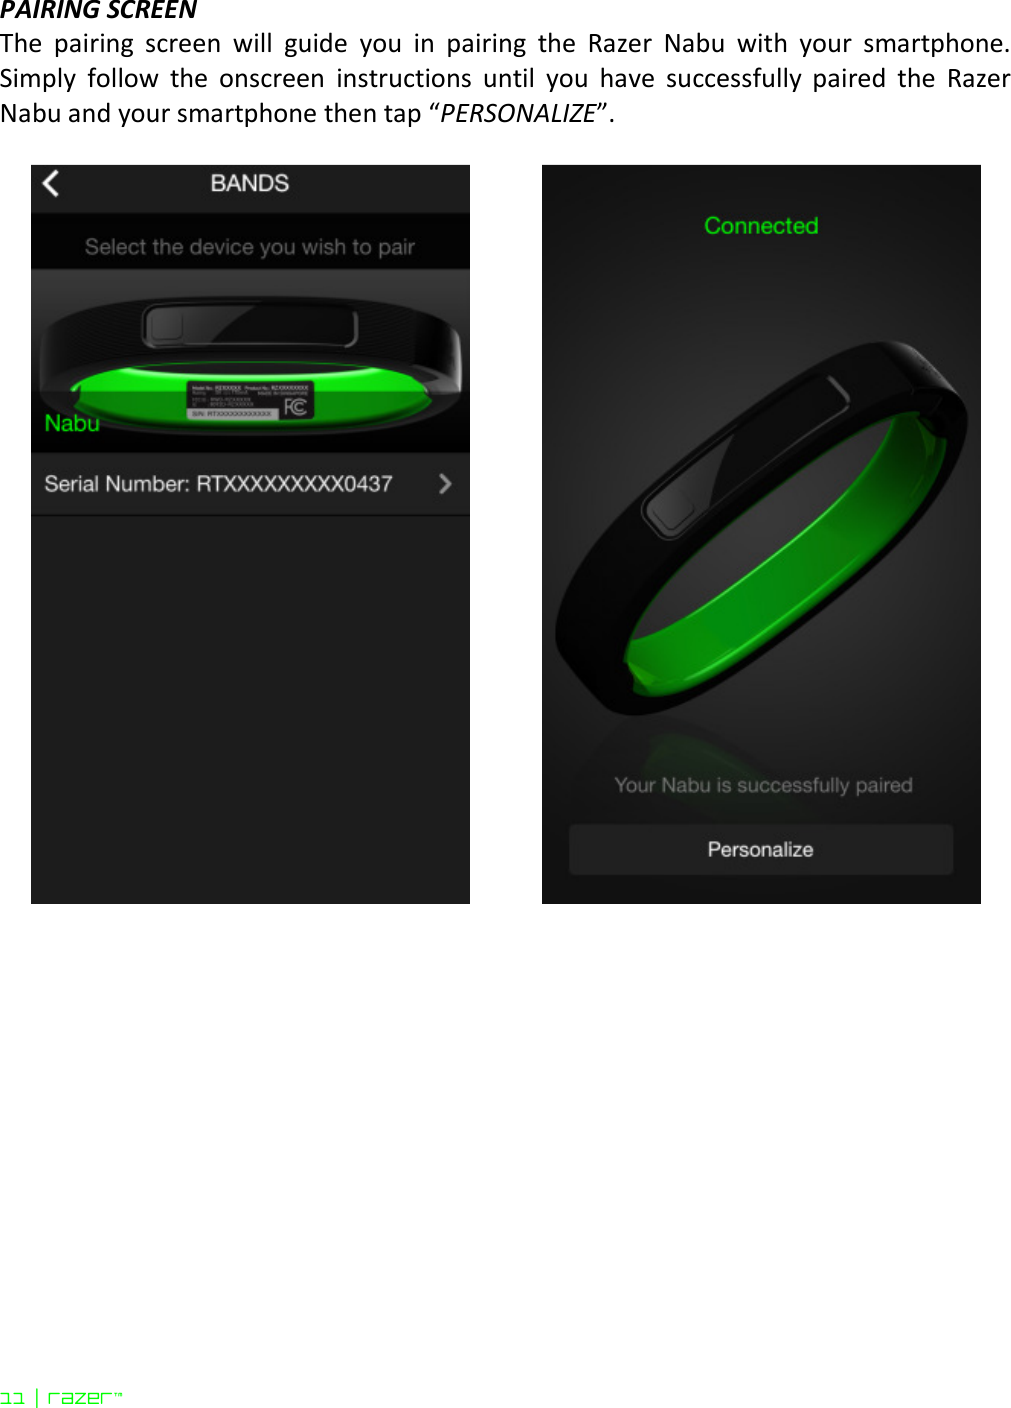  11 | razer™ PAIRING SCREEN The  pairing  screen  will  guide  you  in  pairing  the  Razer  Nabu  with  your  smartphone. Simply  follow  the  onscreen  instructions  until  you  have  successfully  paired  the  Razer Nabu and your smartphone then tap “PERSONALIZE”.       